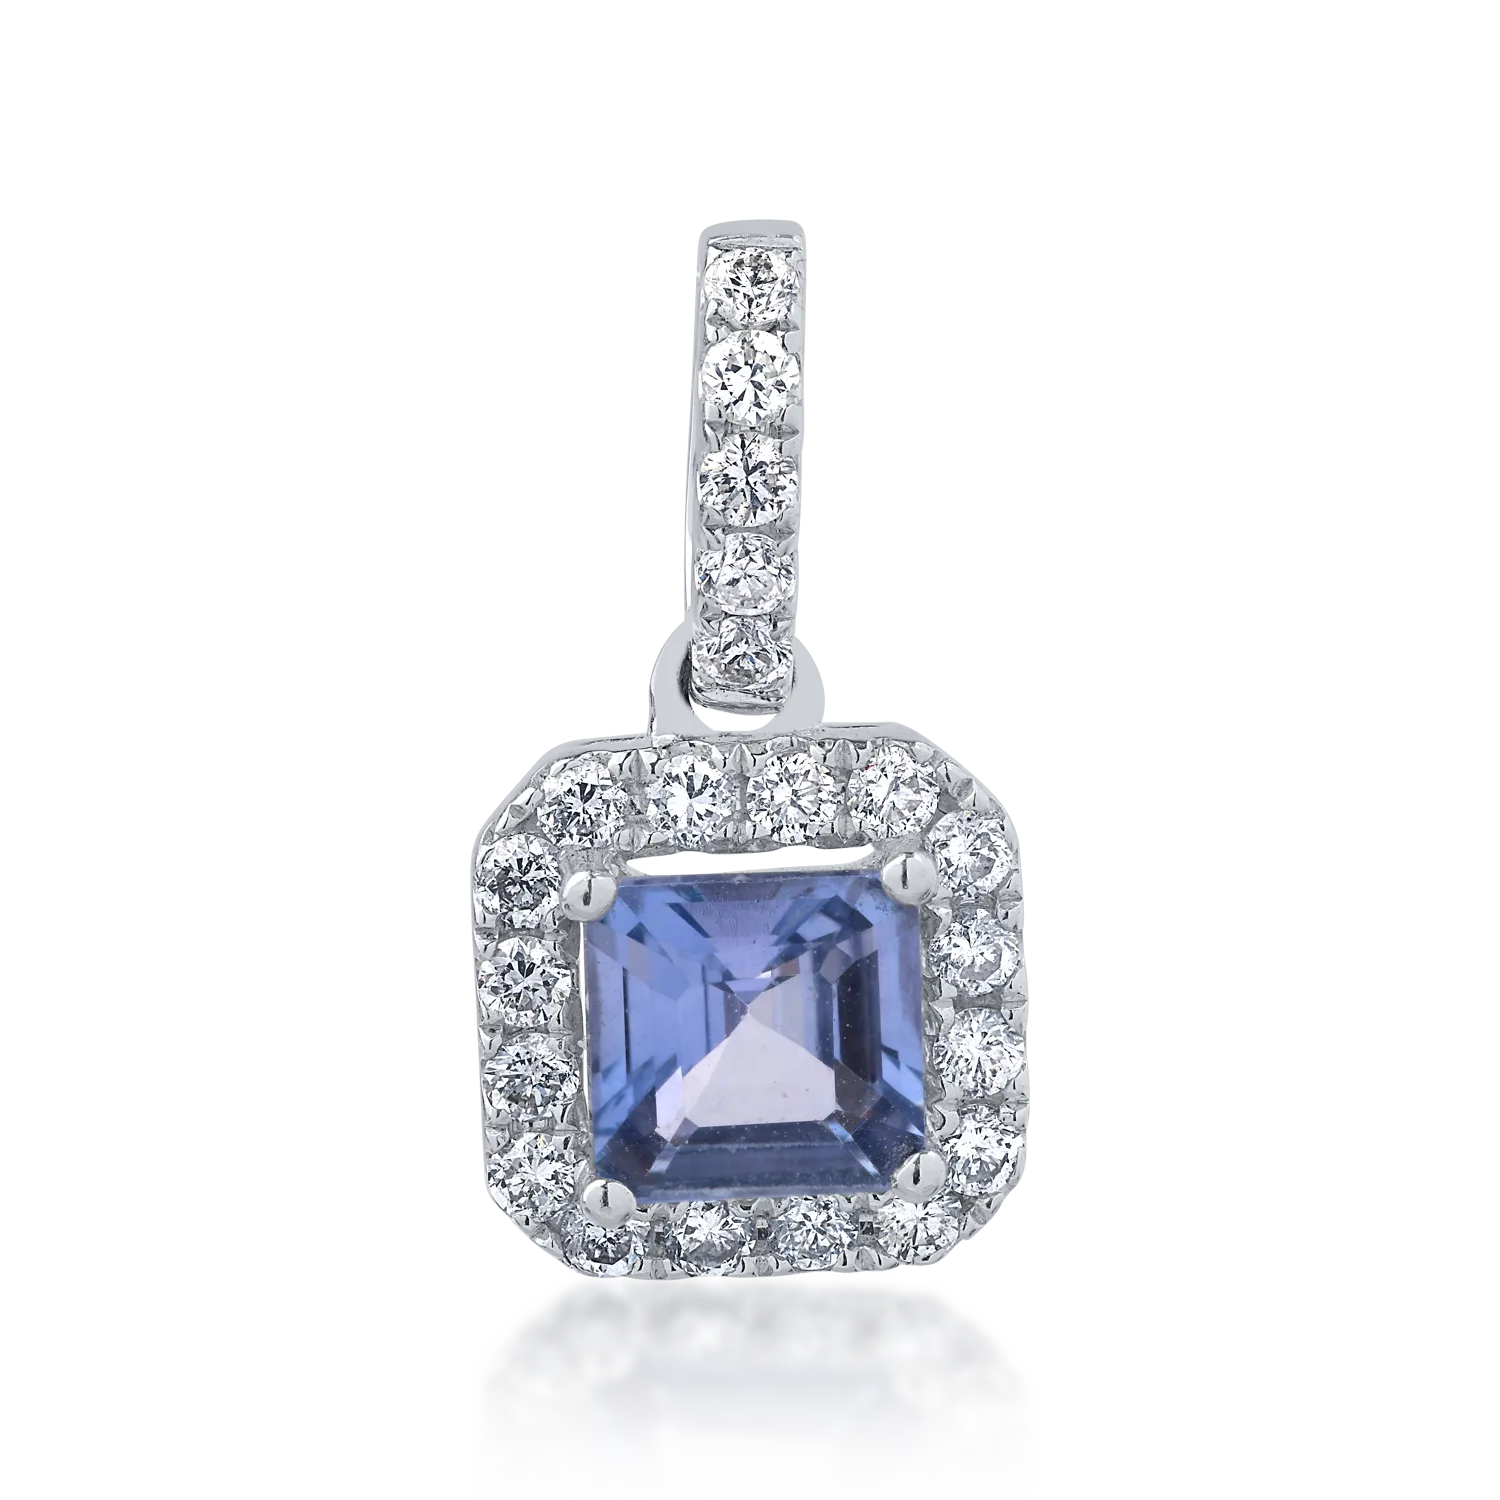 18K white gold pendant with 0.77ct sapphire and 0.24ct diamonds